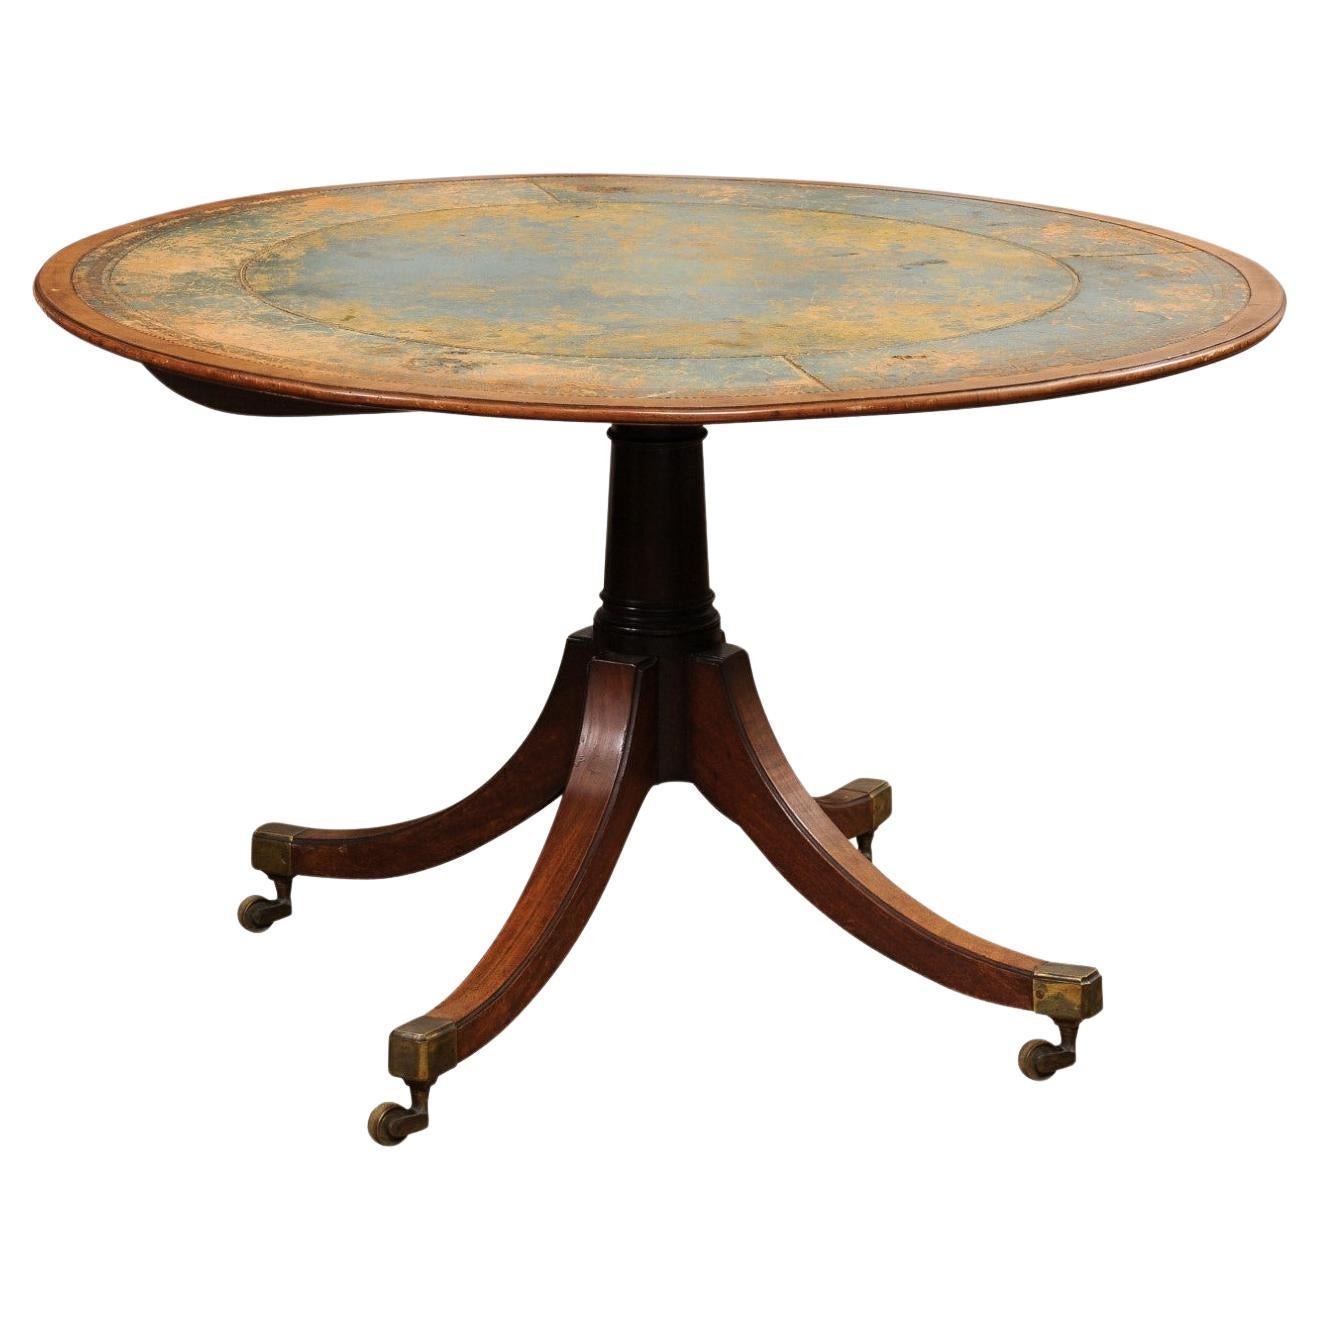 English Turn of the Century Mahogany Tilt Top Center Table with Leather Top For Sale